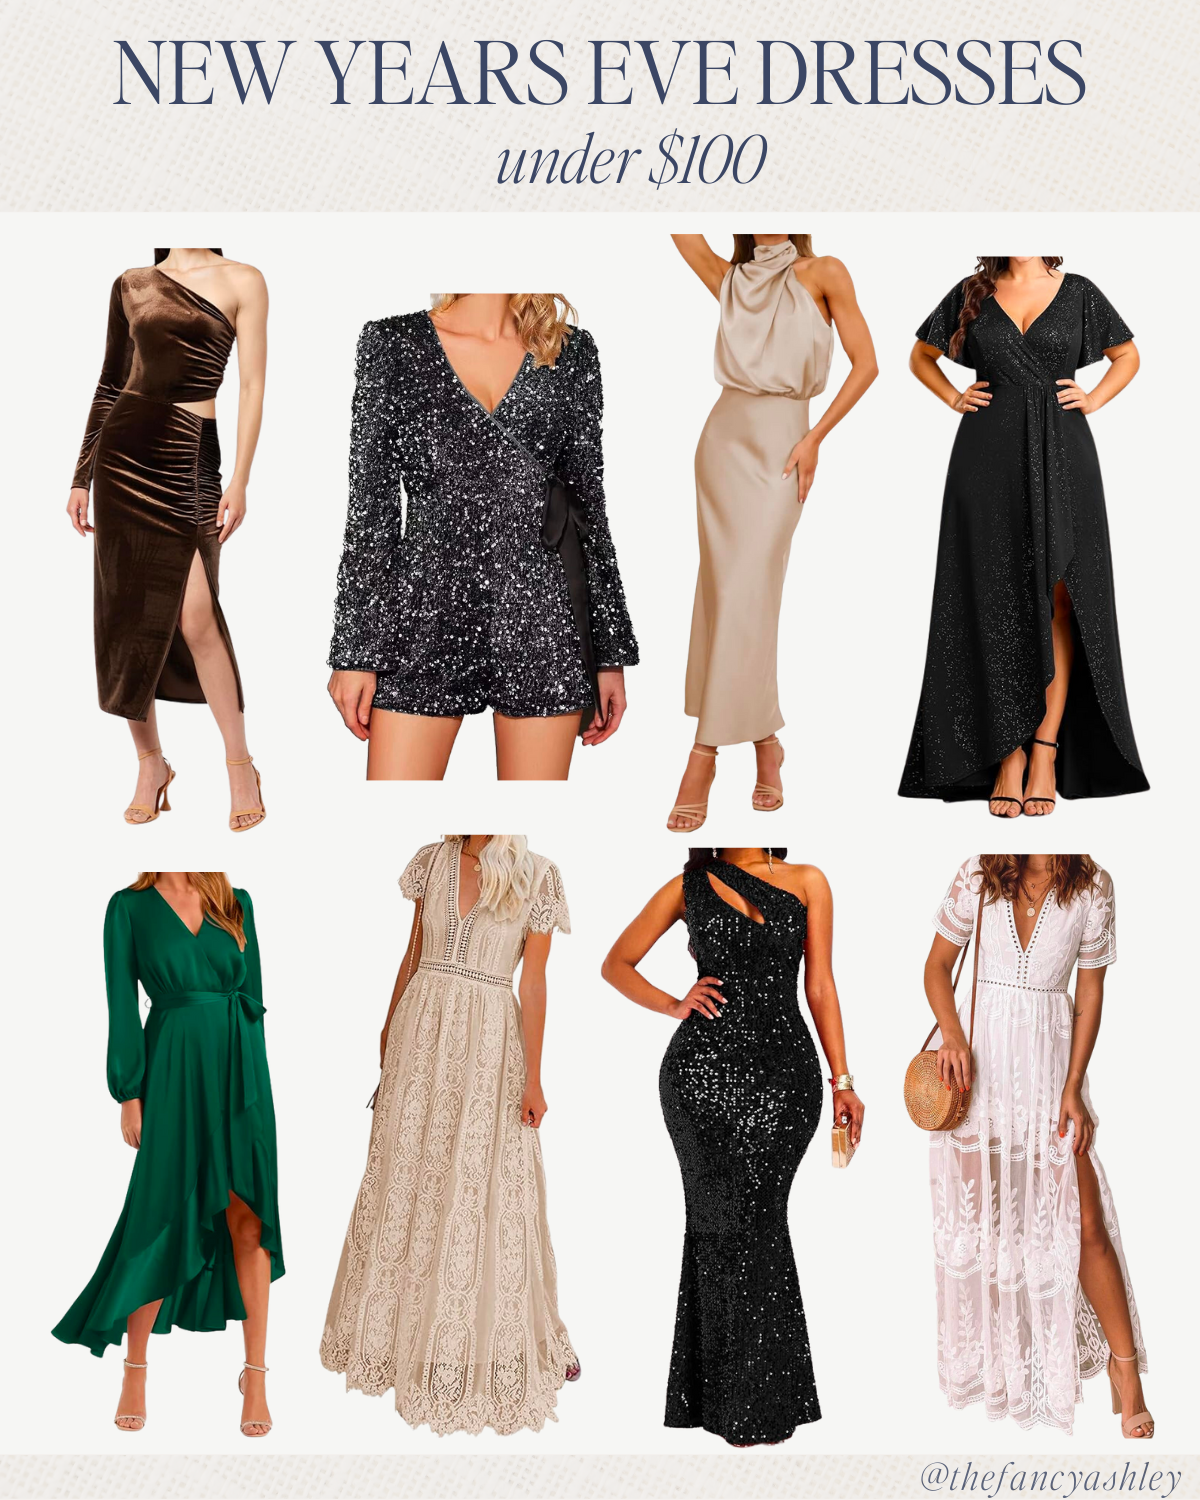 New Year's Eve dresses